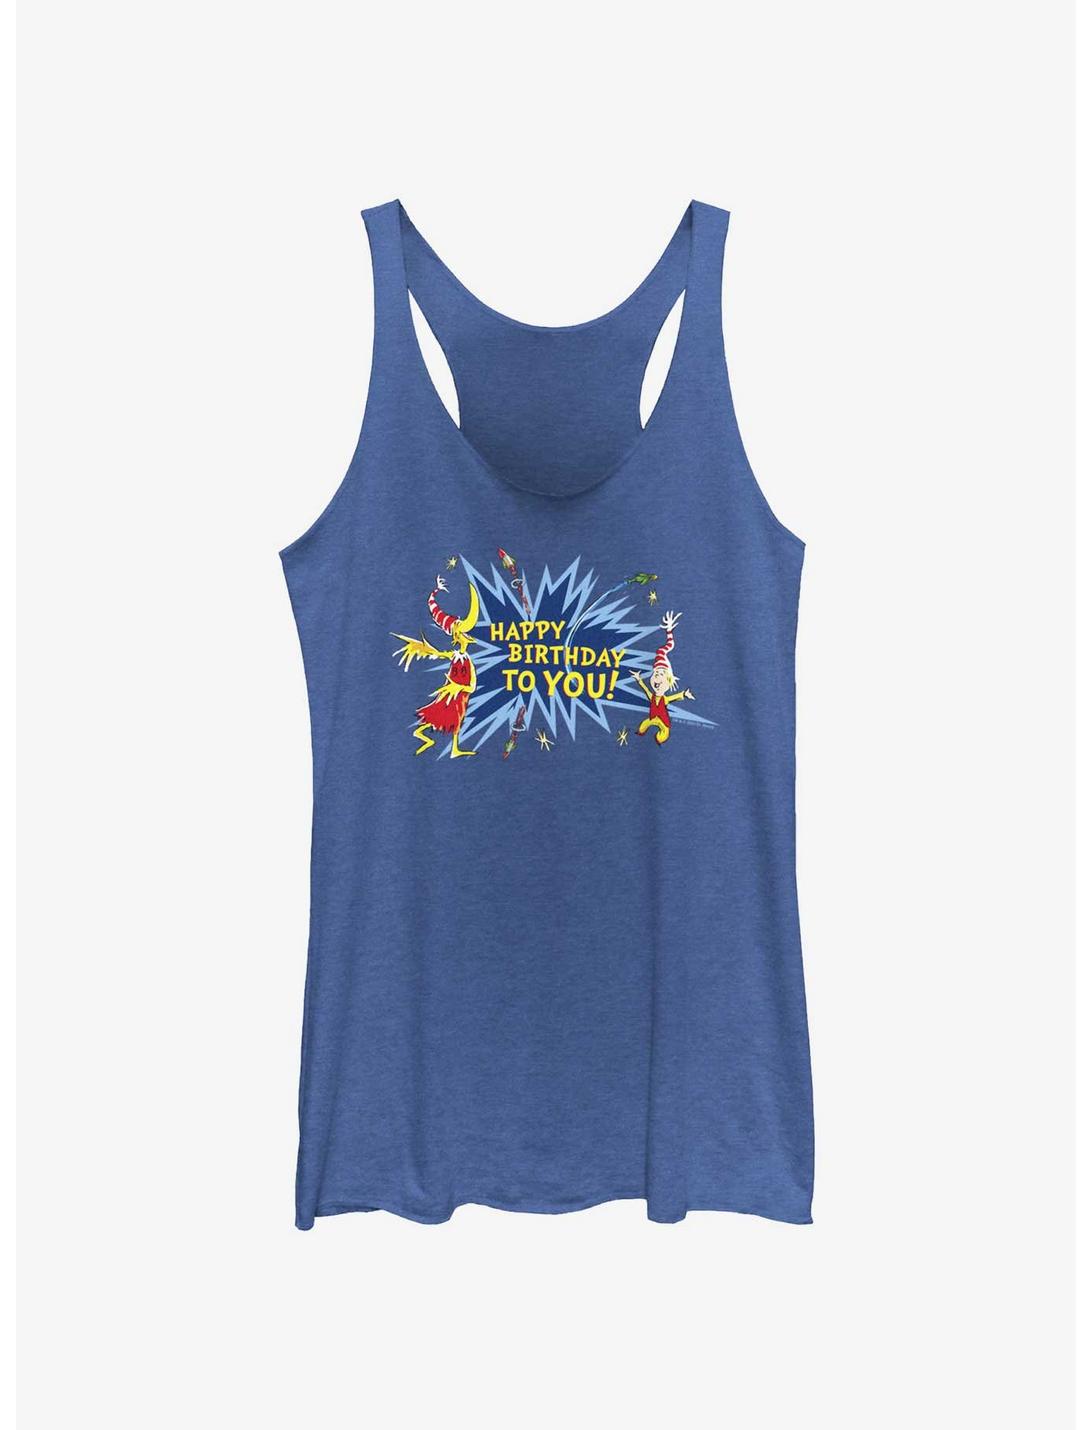 Dr. Seuss Happy Birthday To You Womens Tank Top, ROY HTR, hi-res